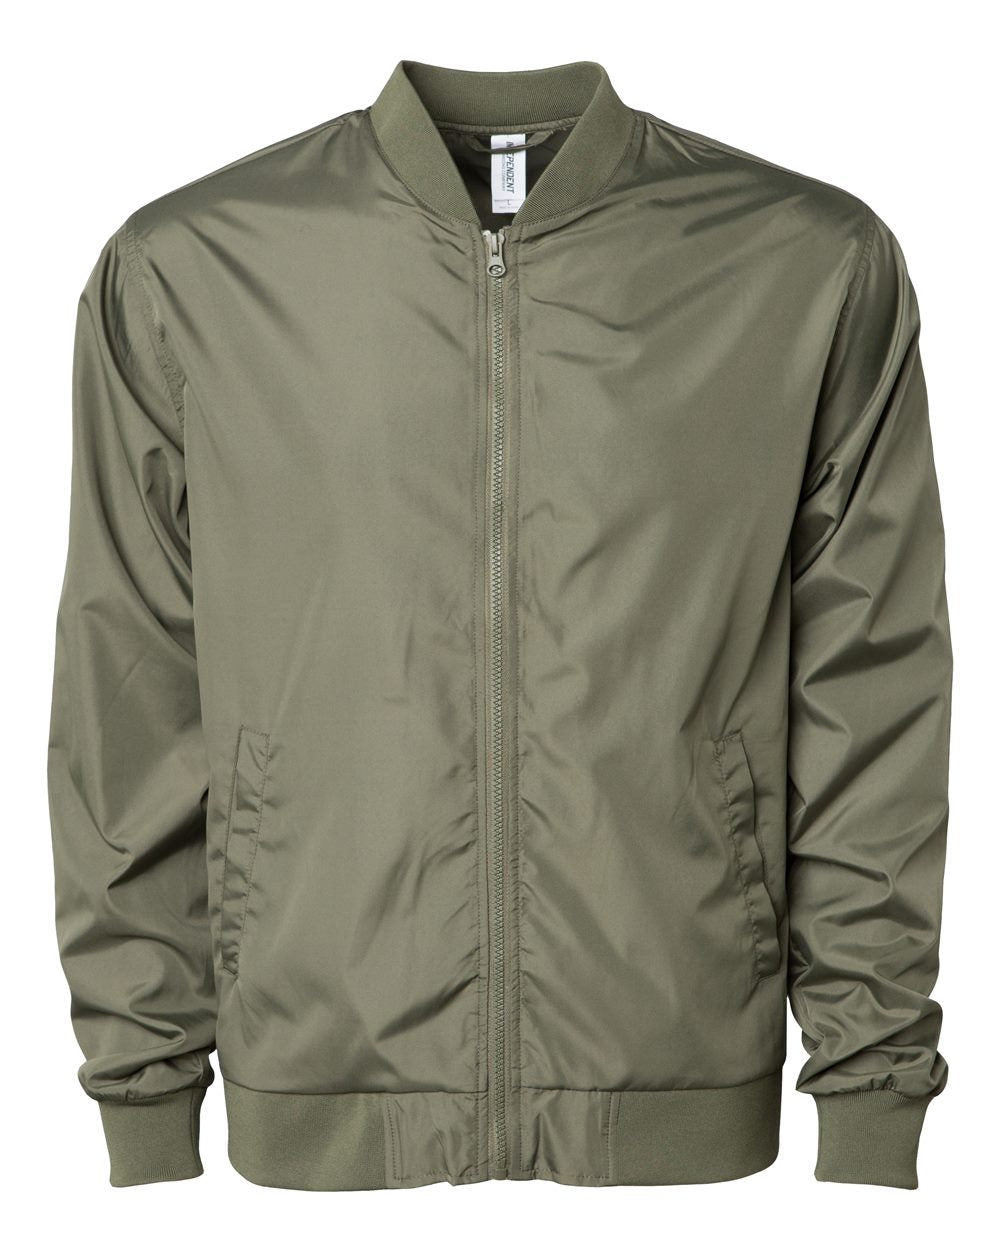 independent trading co bomber jacket army green